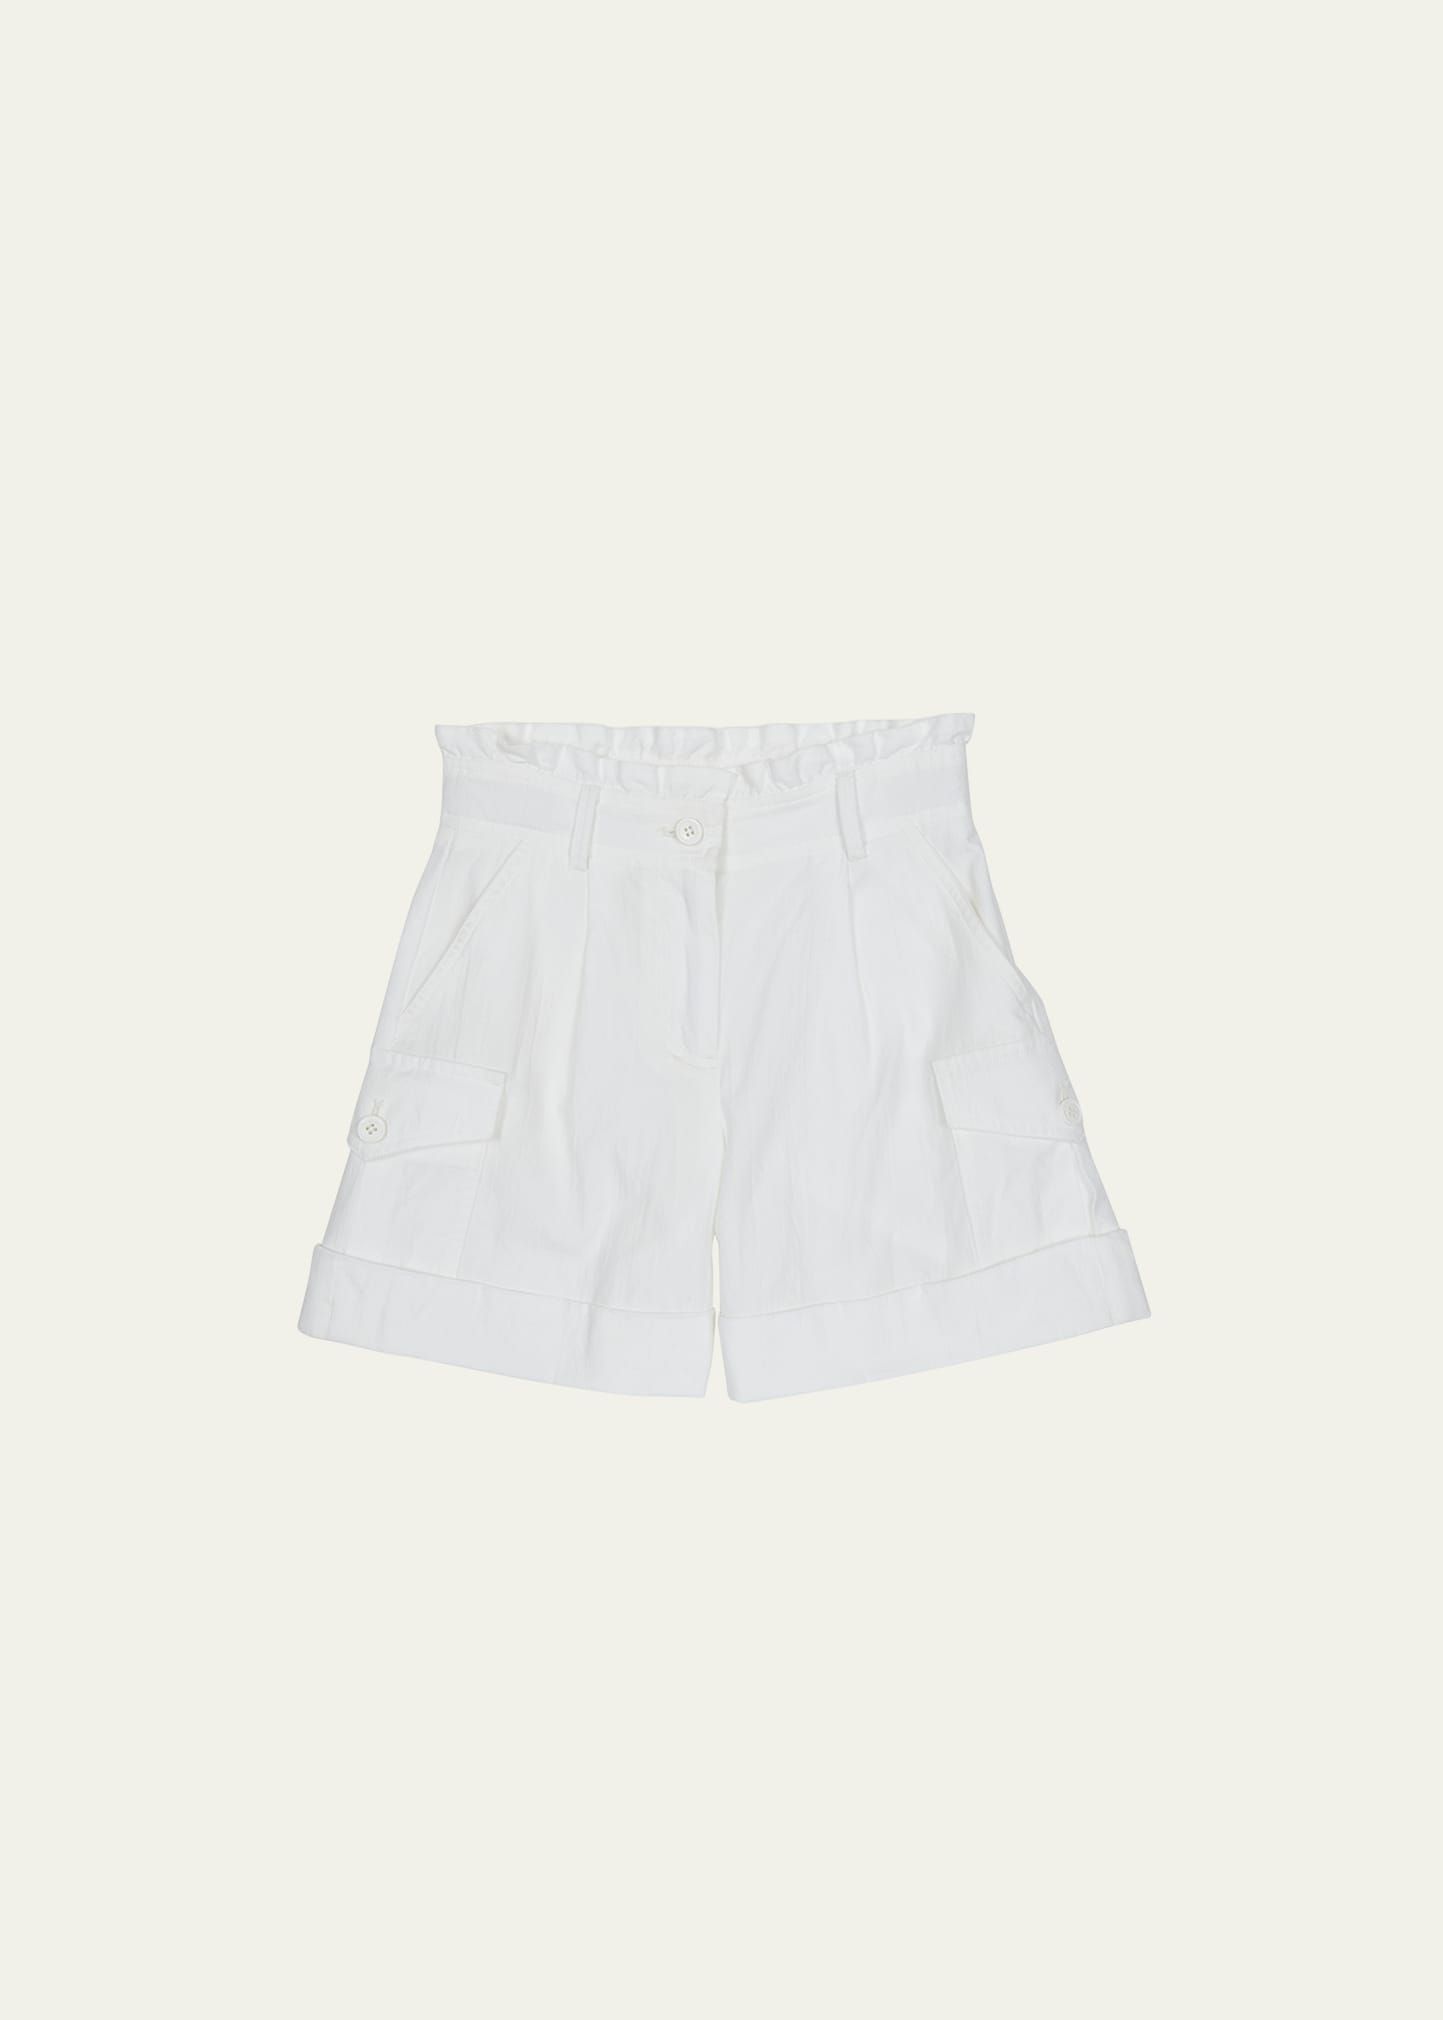 Girl's Paper Bag Shorts, Size 8-14